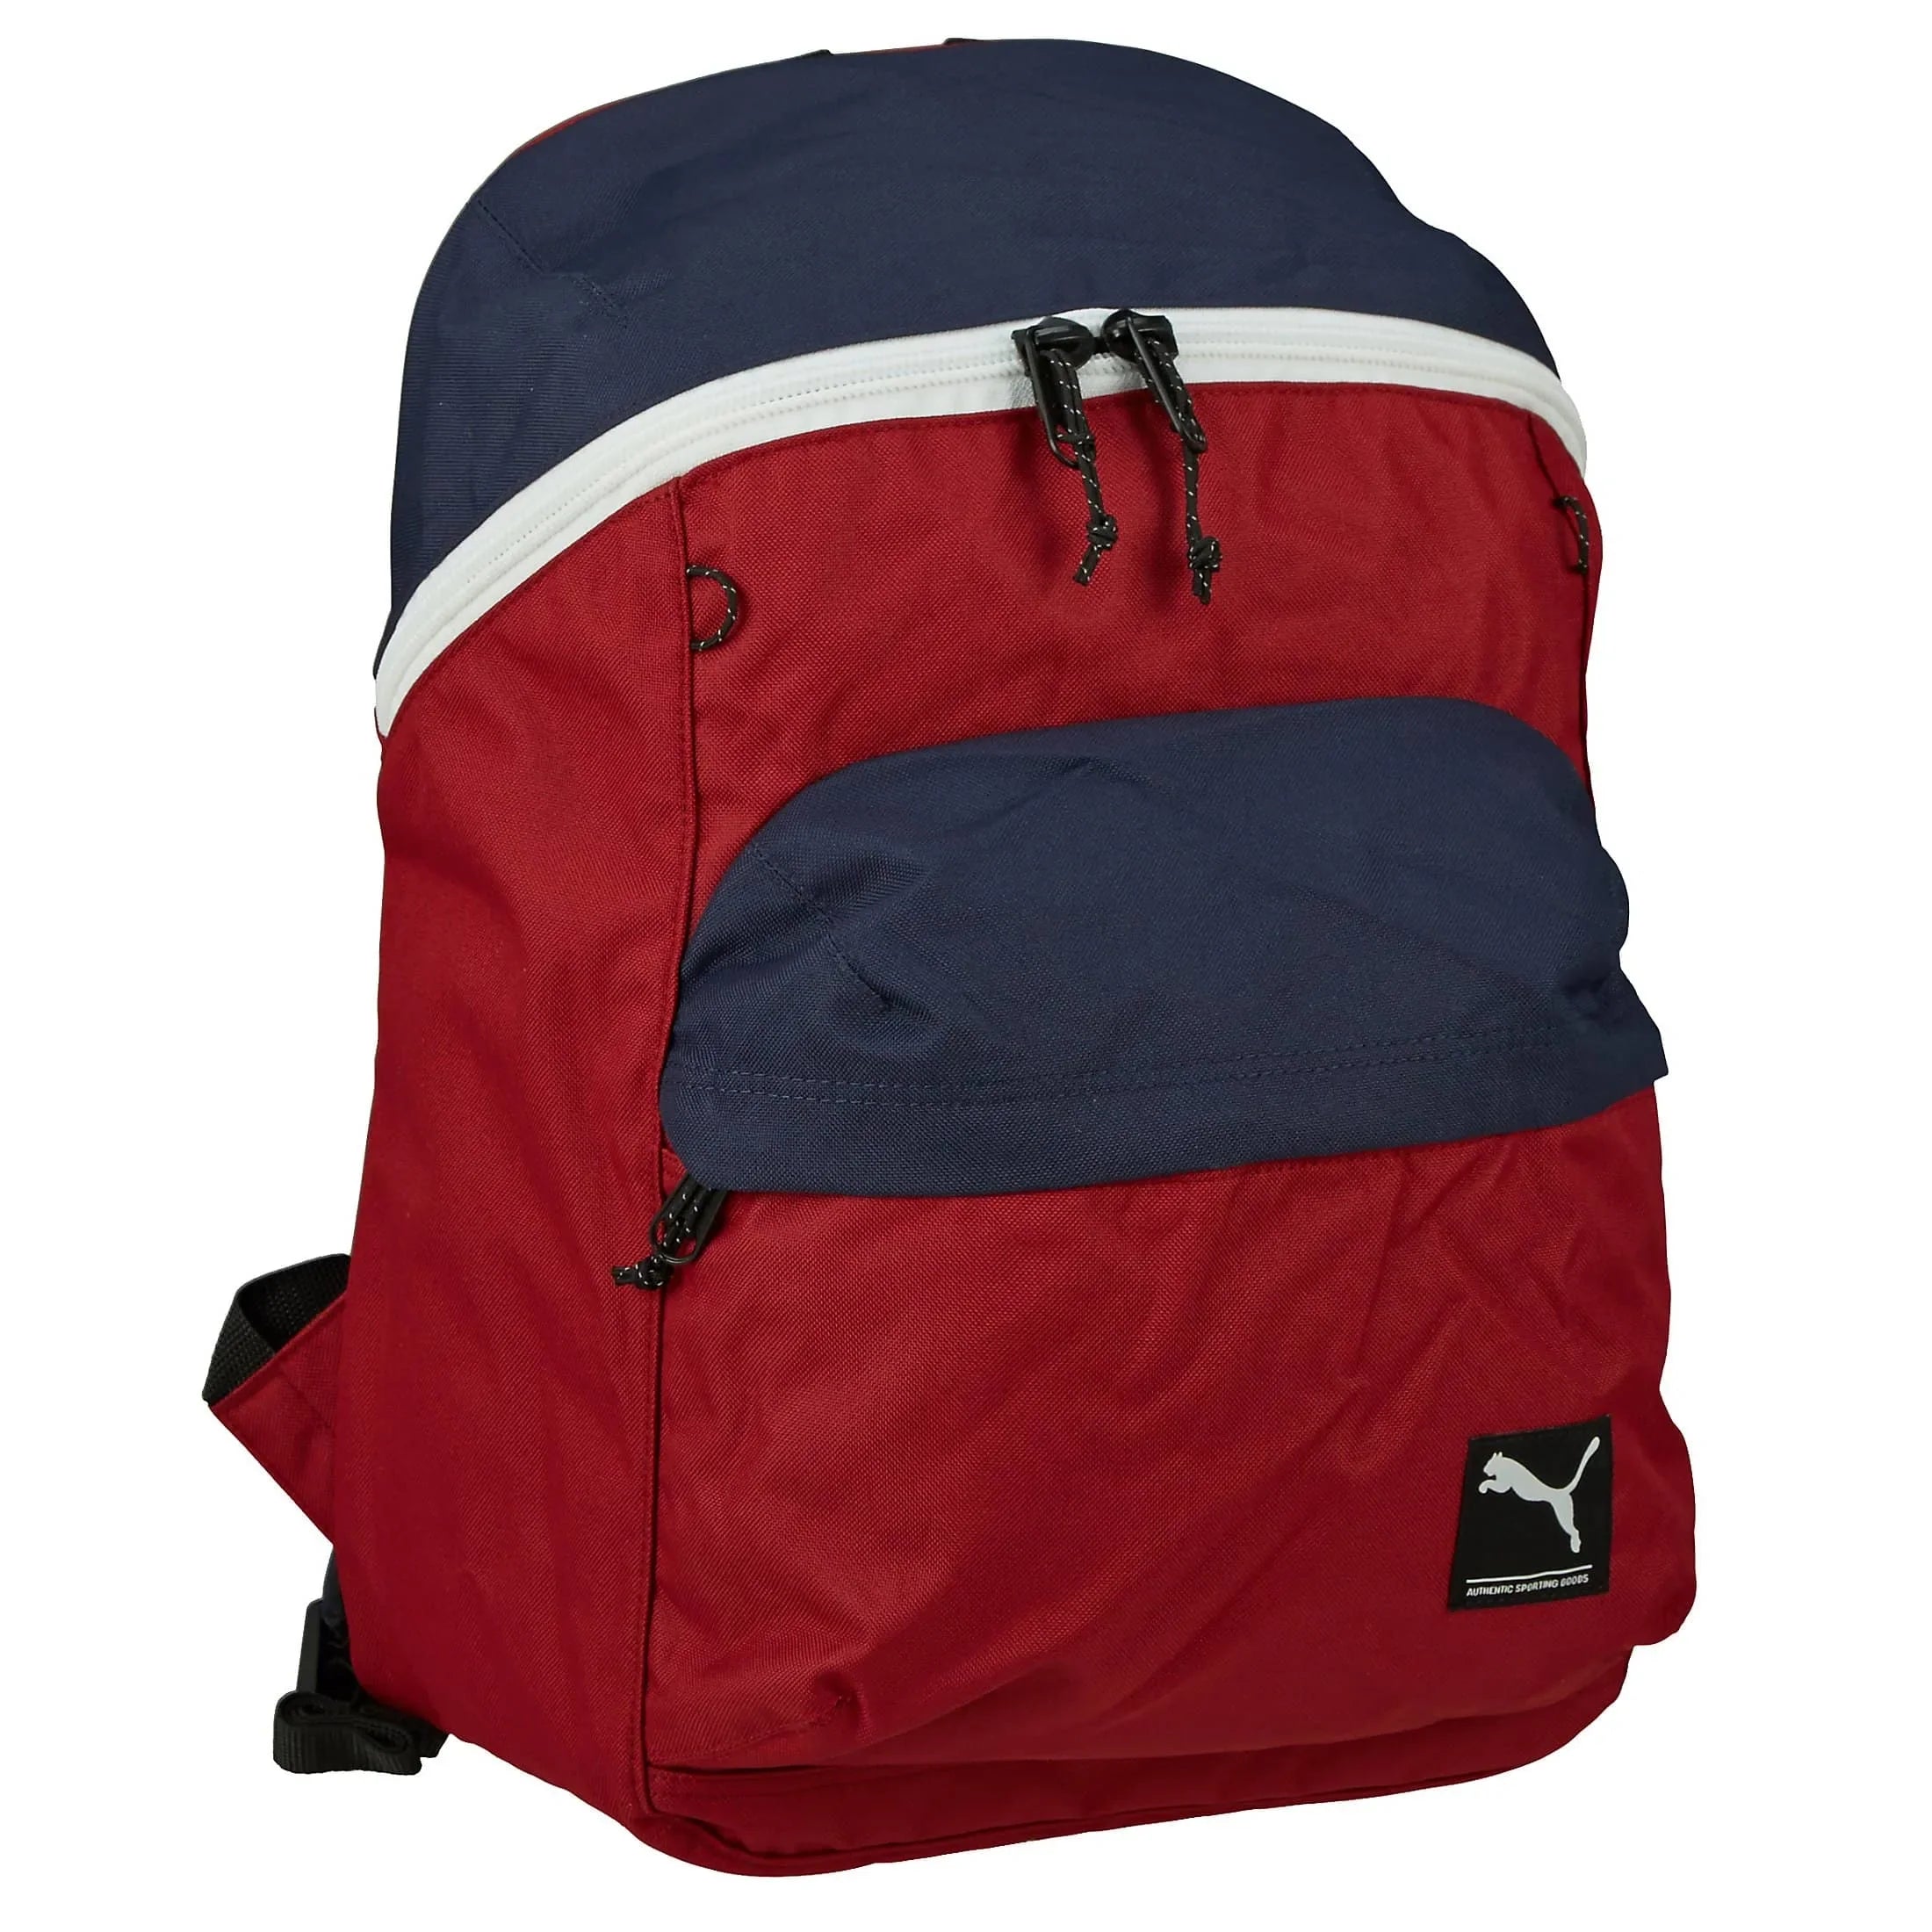 Puma Foundation Backpack backpack with laptop compartment 45 cm - biking red-peacoat